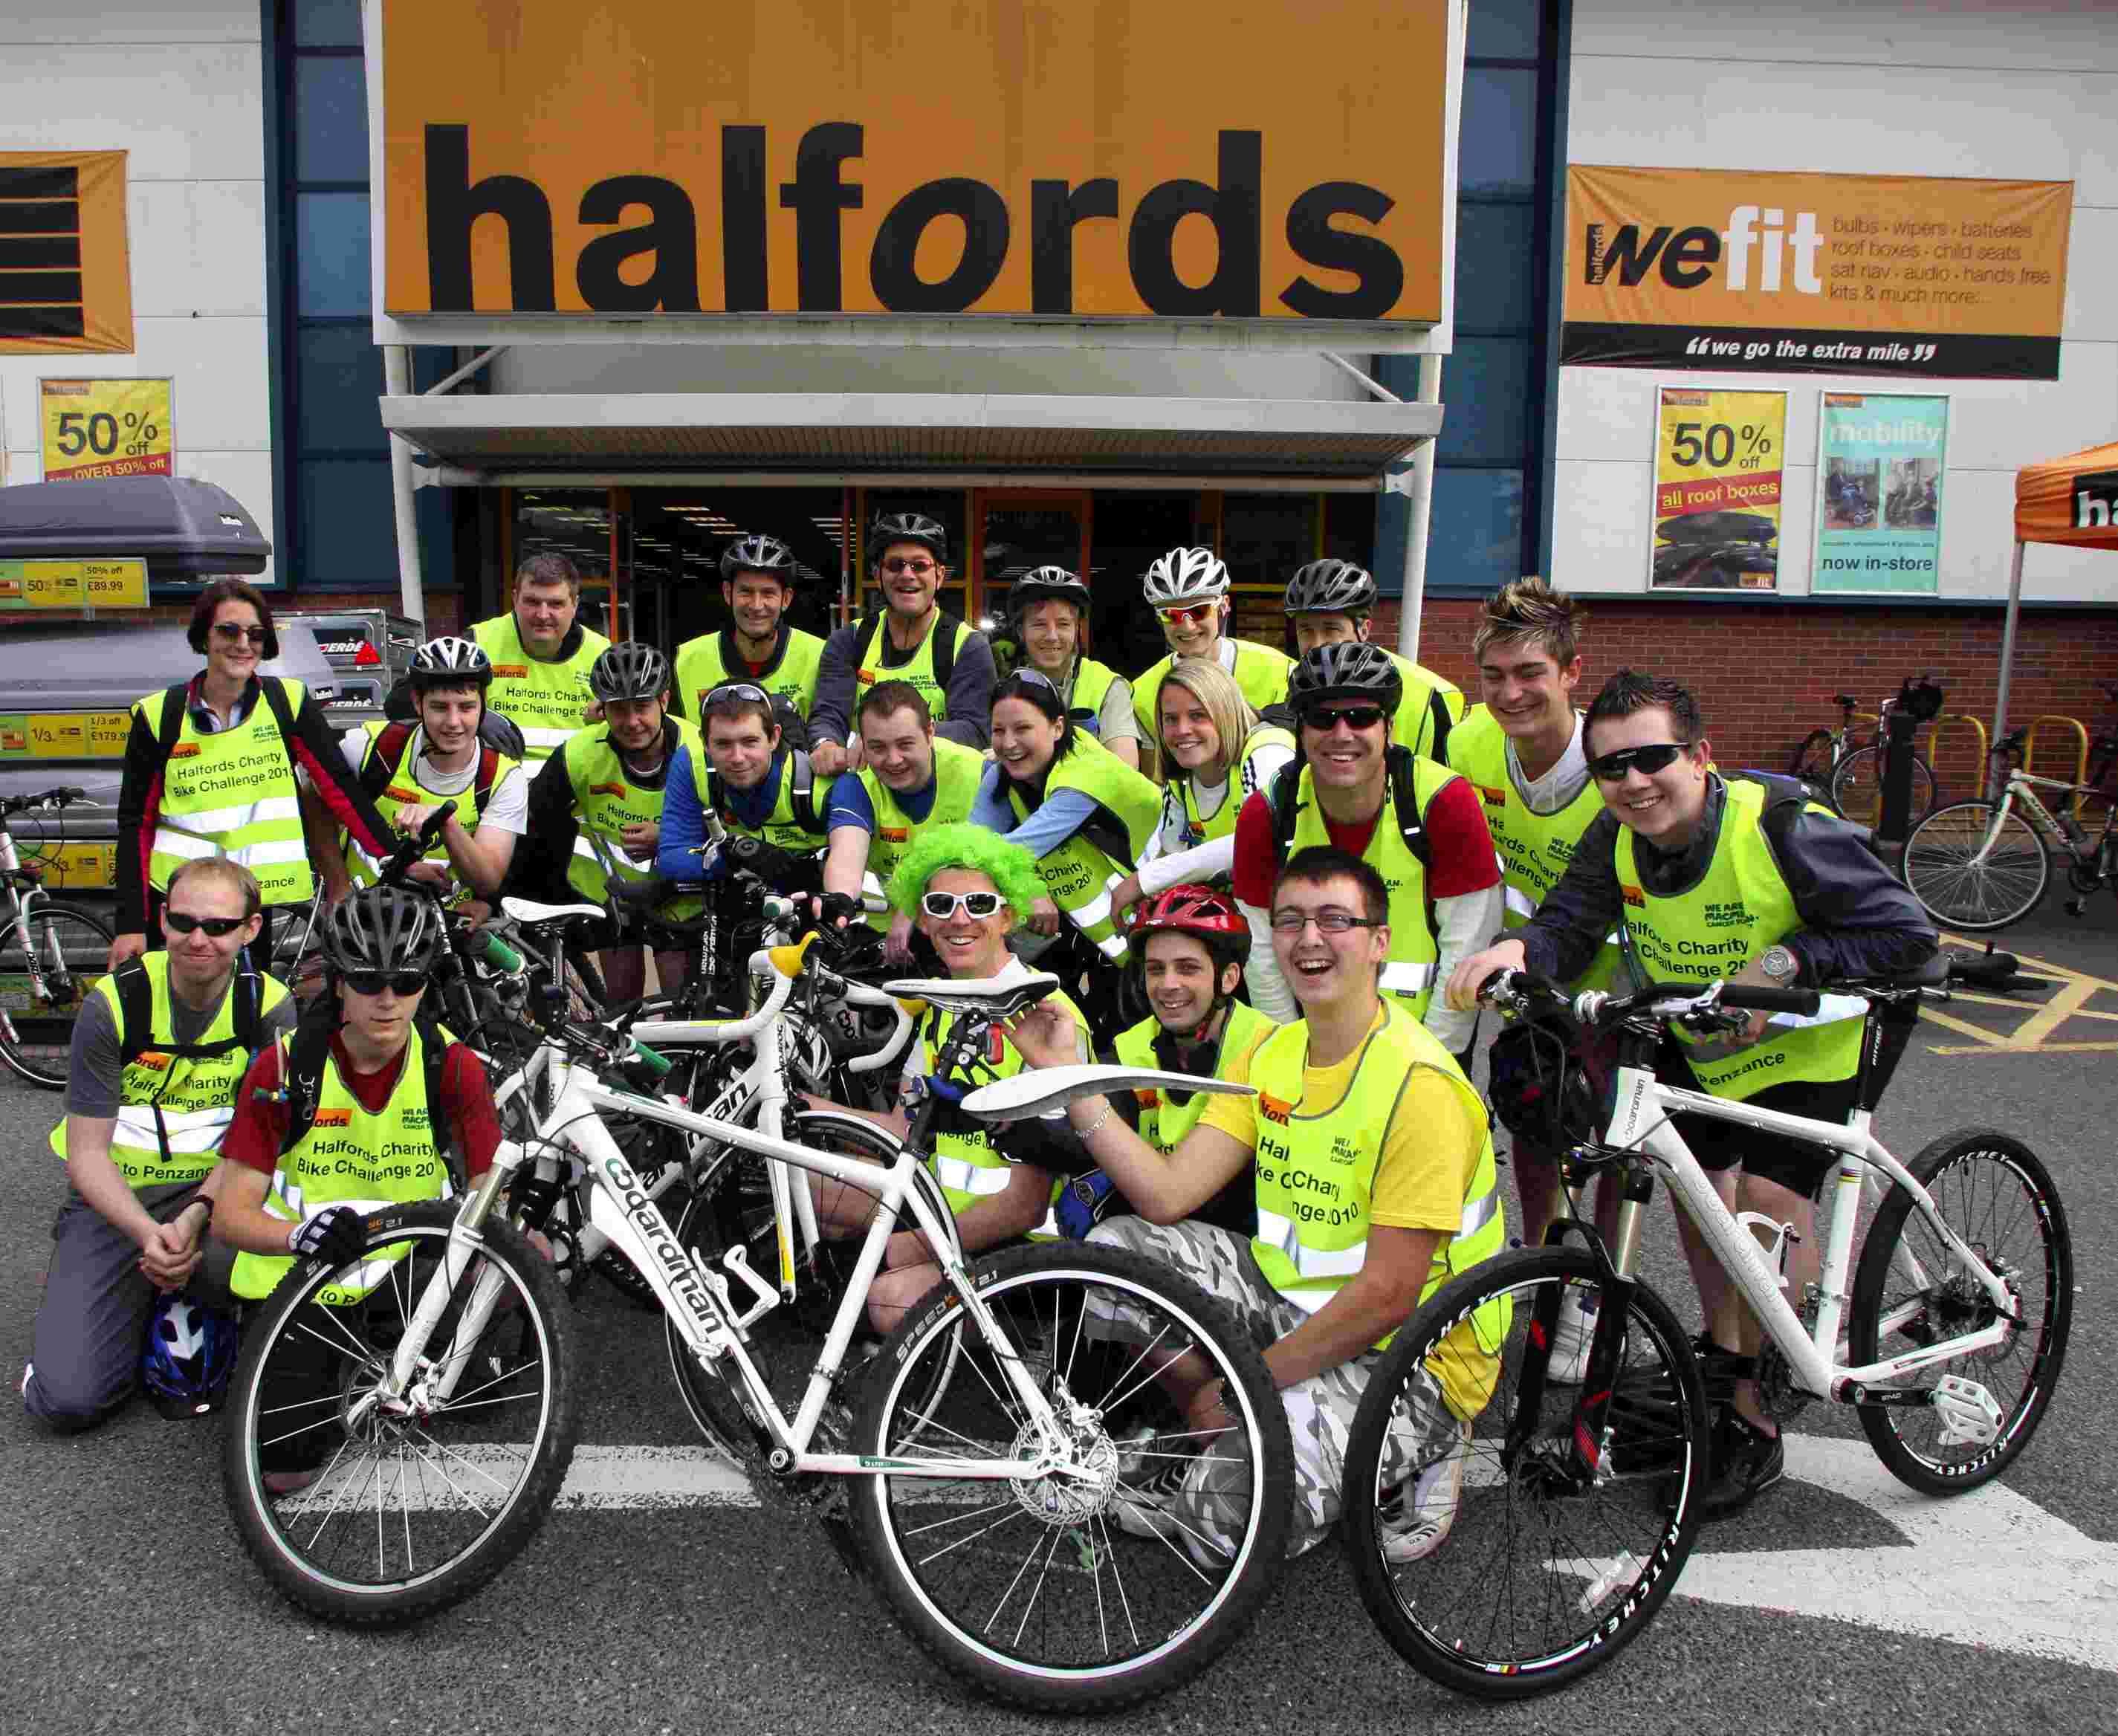 bikes for africa halfords